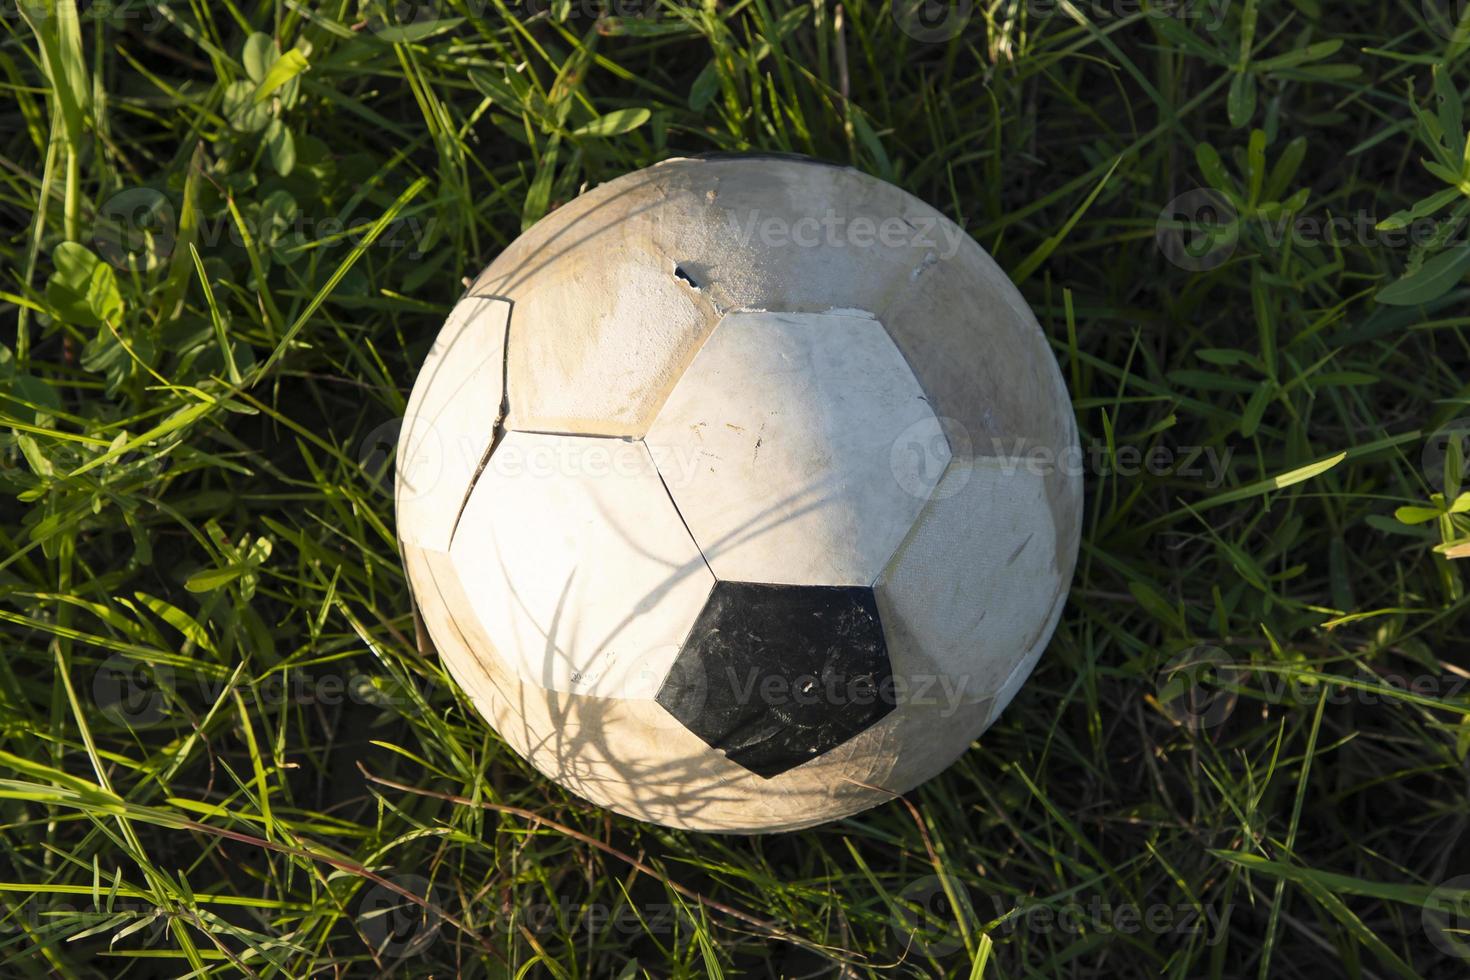 An old soccer ball lies in the grass, close-up photo